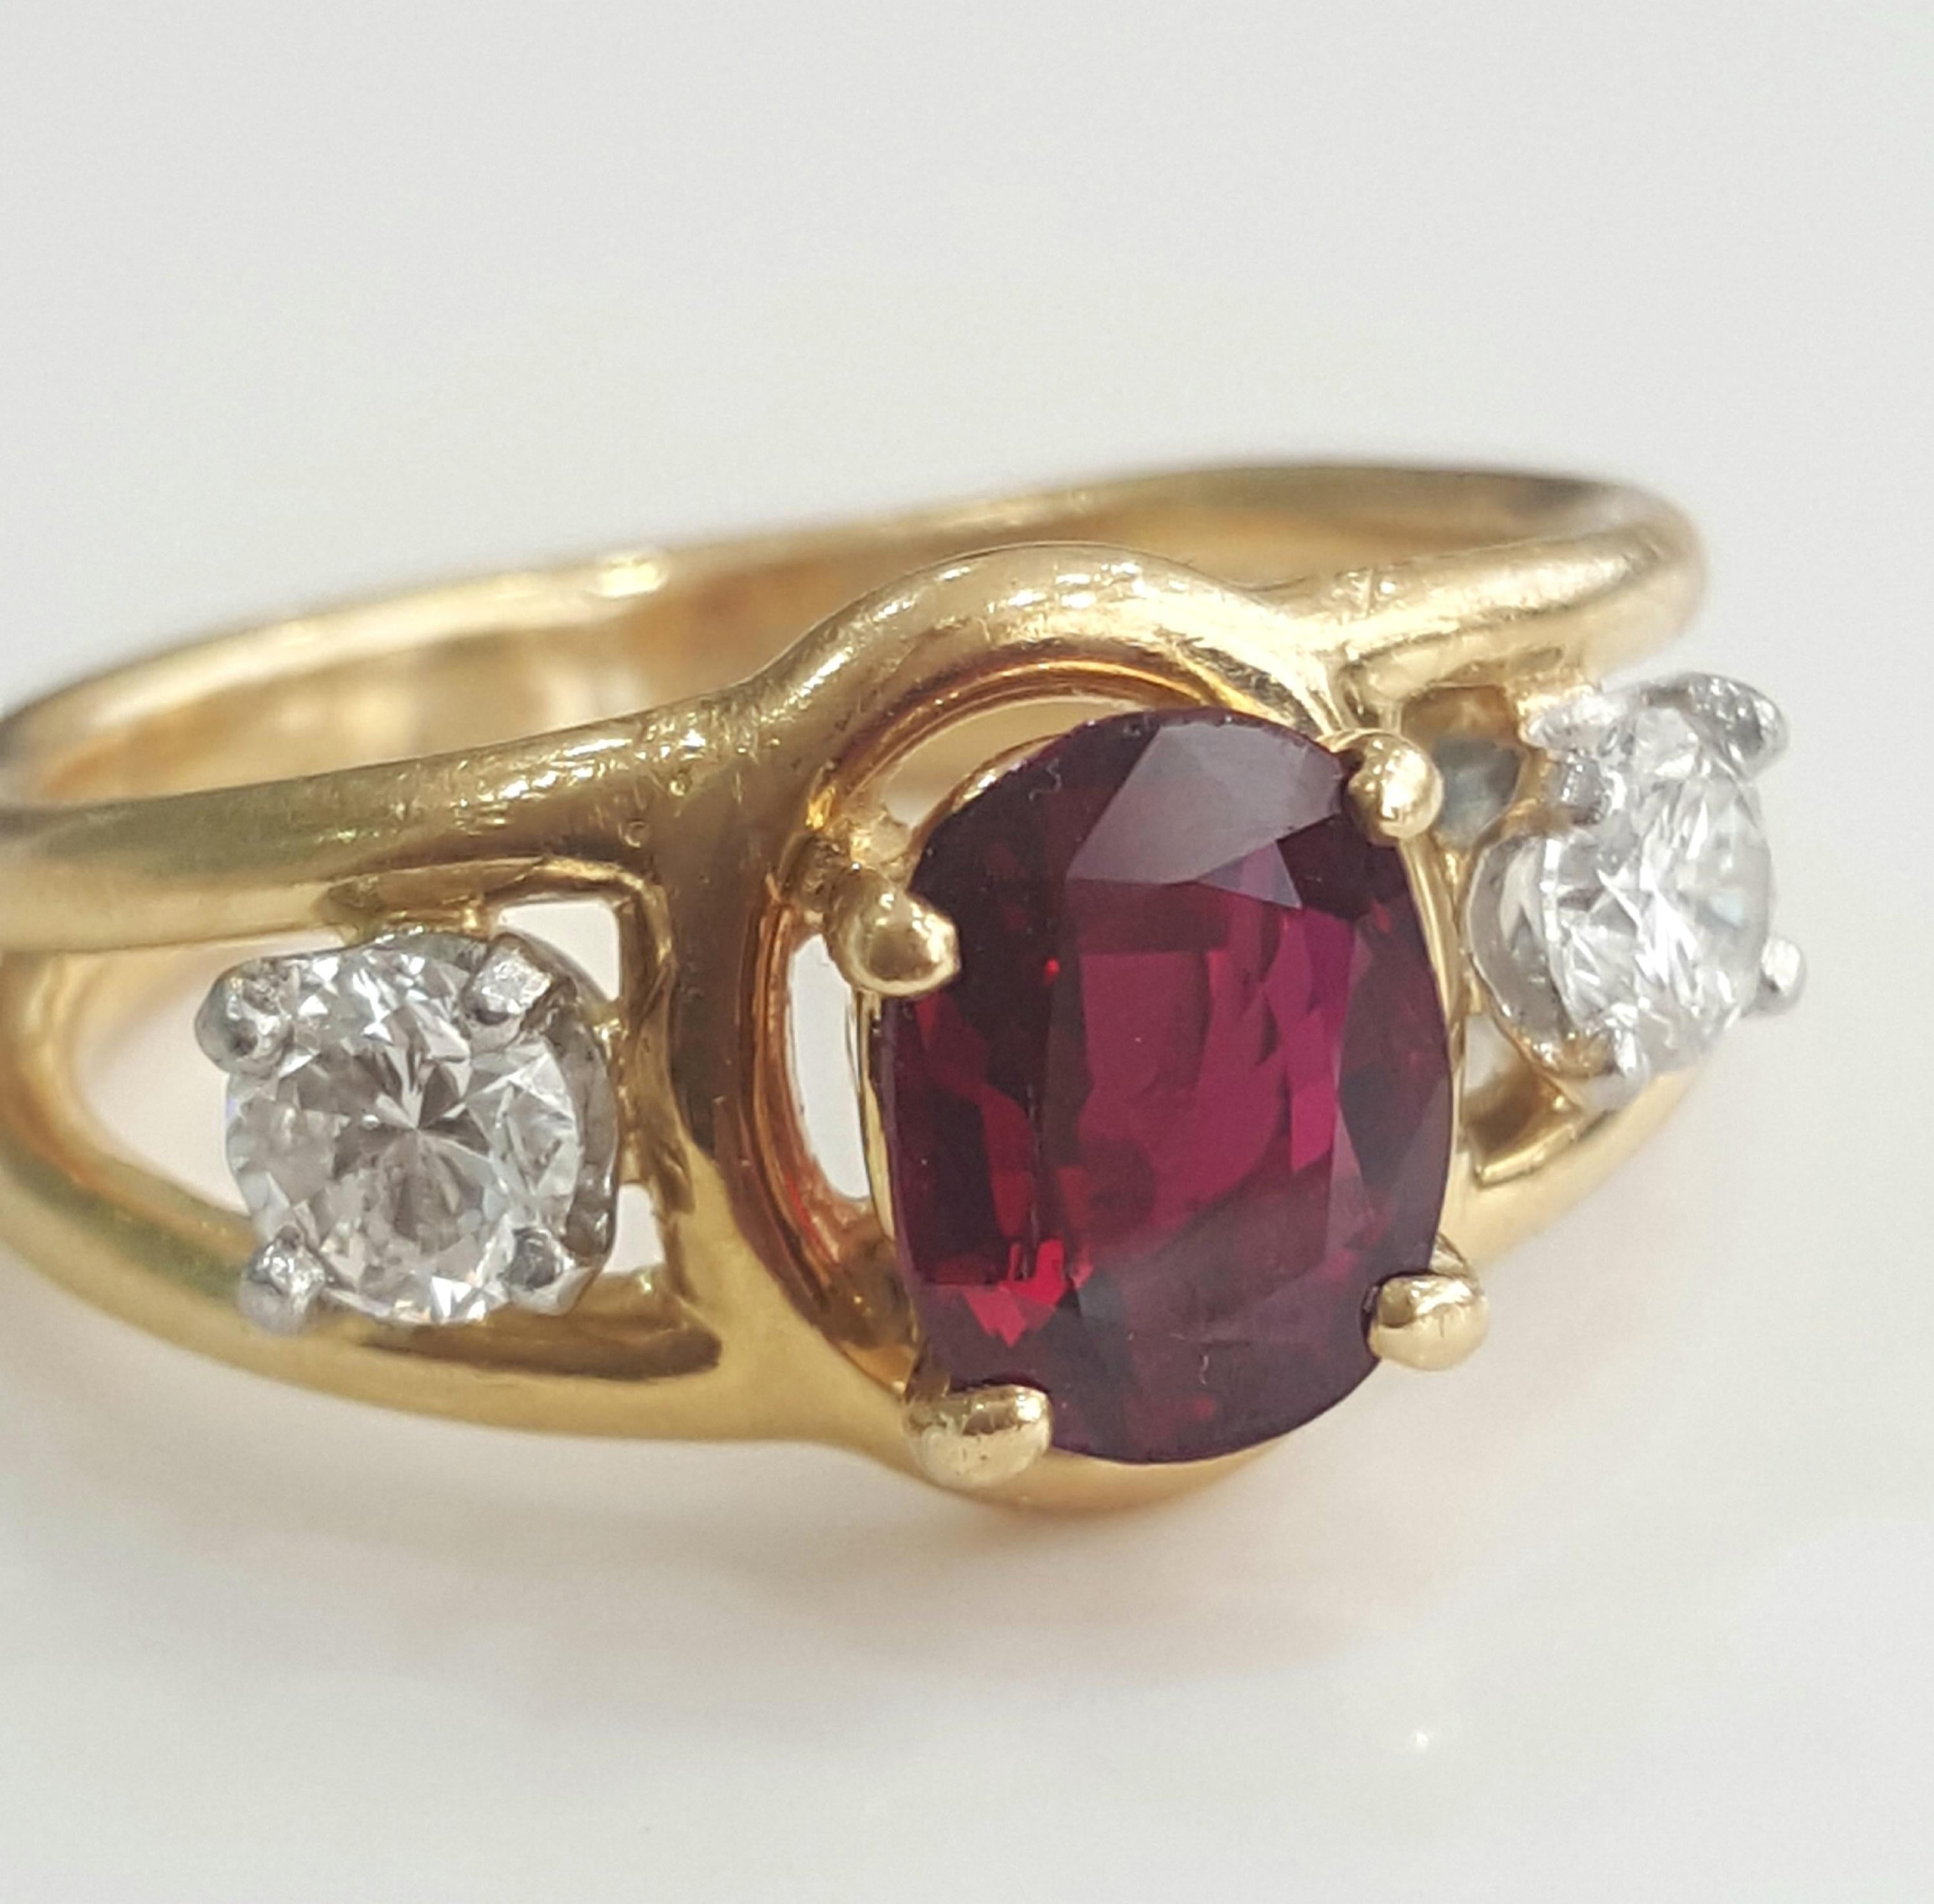  Cartier 1.70 Carat Natural Oval Ruby Heat and White Diamond Ring in 18 Karat. 1